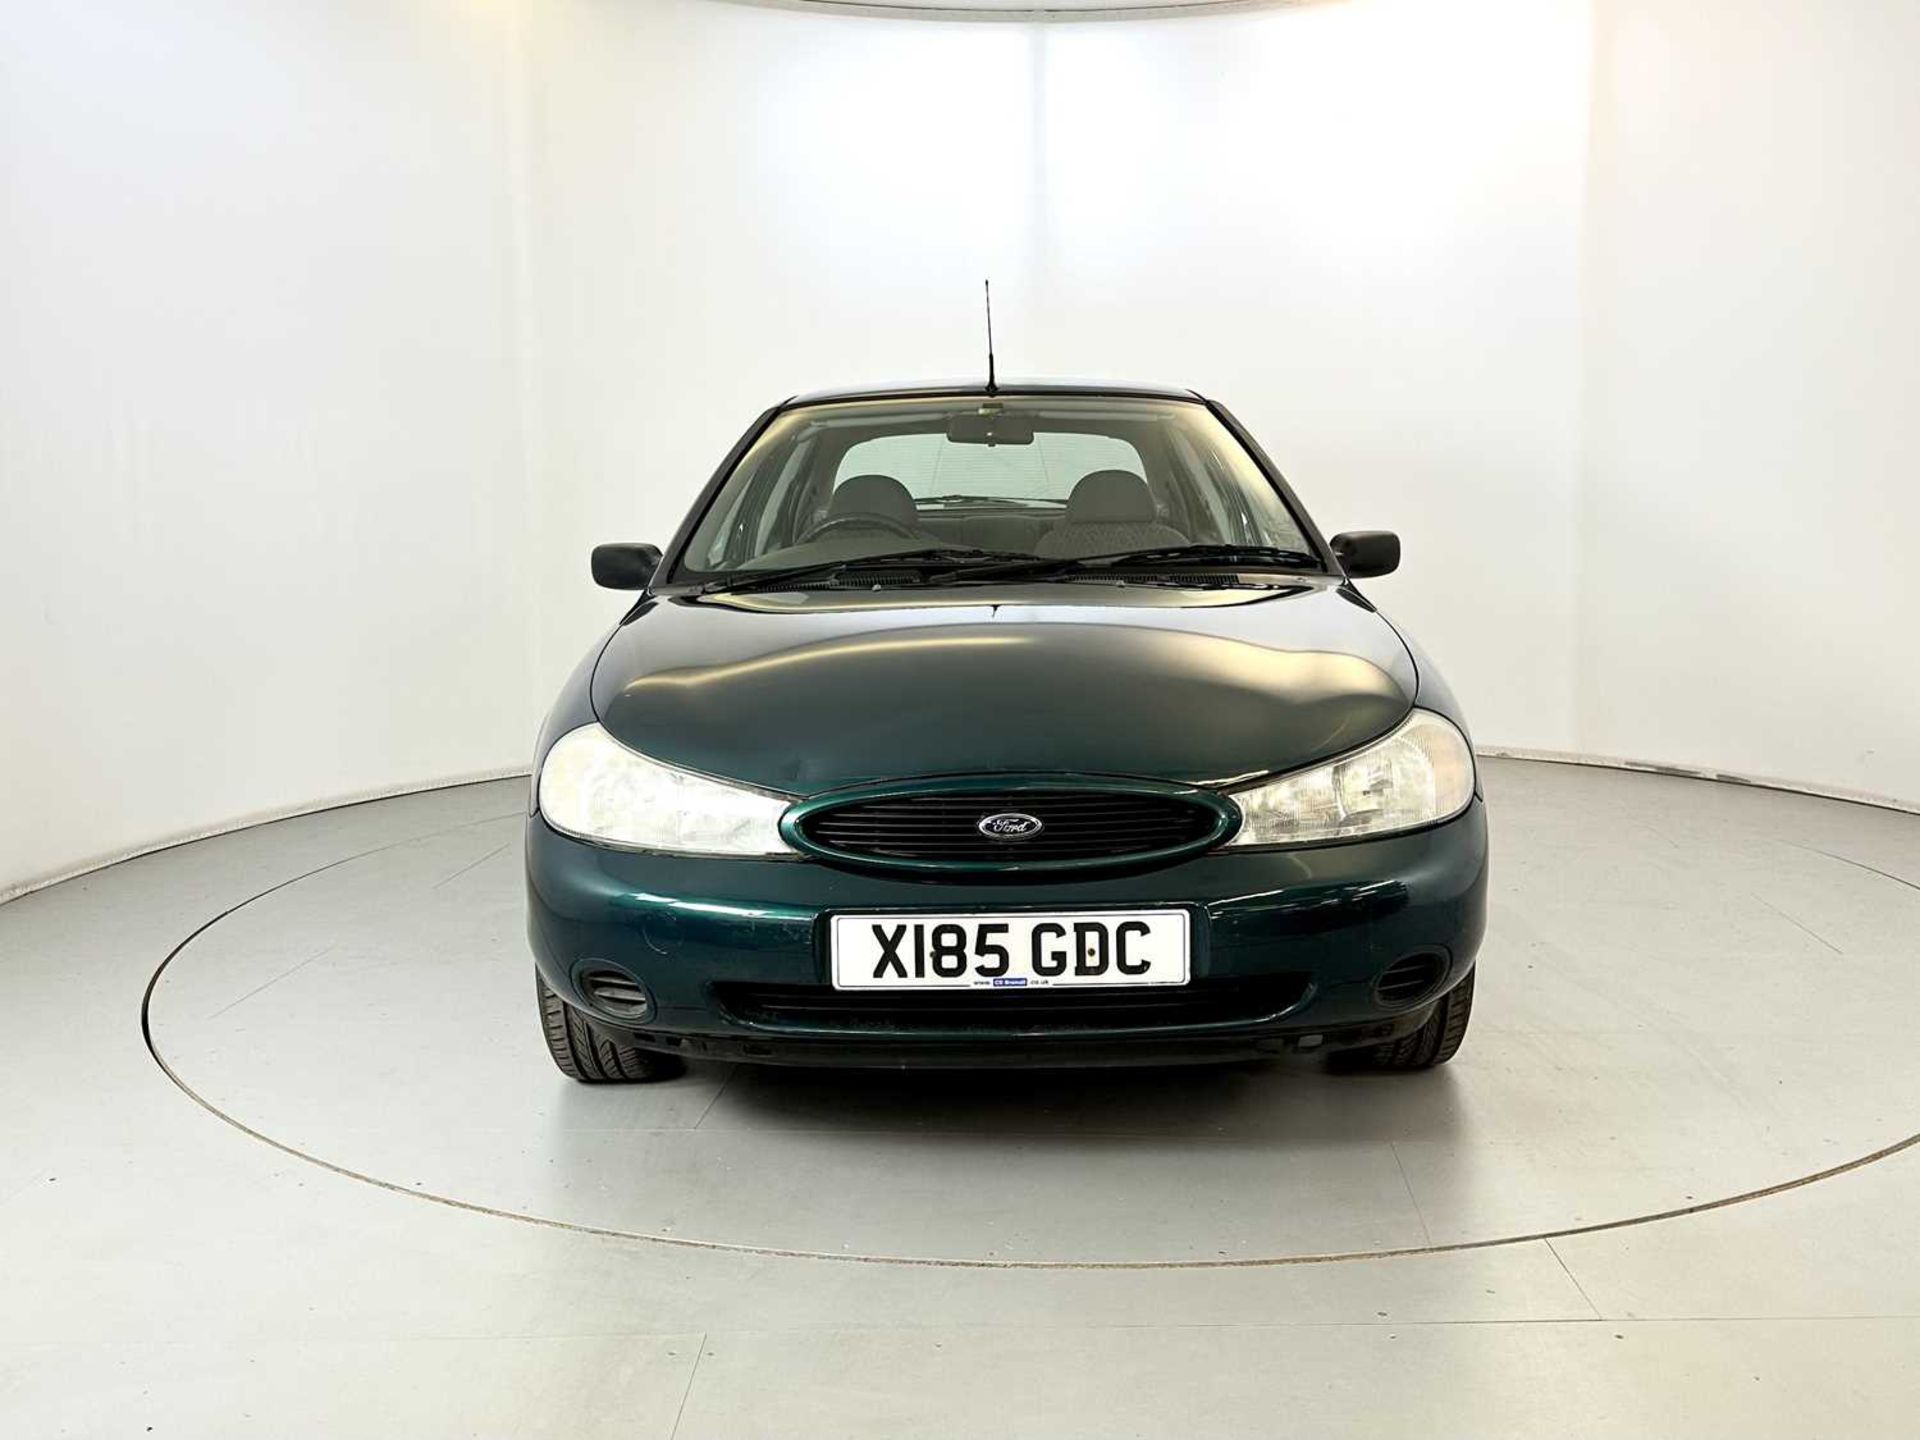 2000 Ford Mondeo 1 Owner from new & 17,000 miles - Image 2 of 34